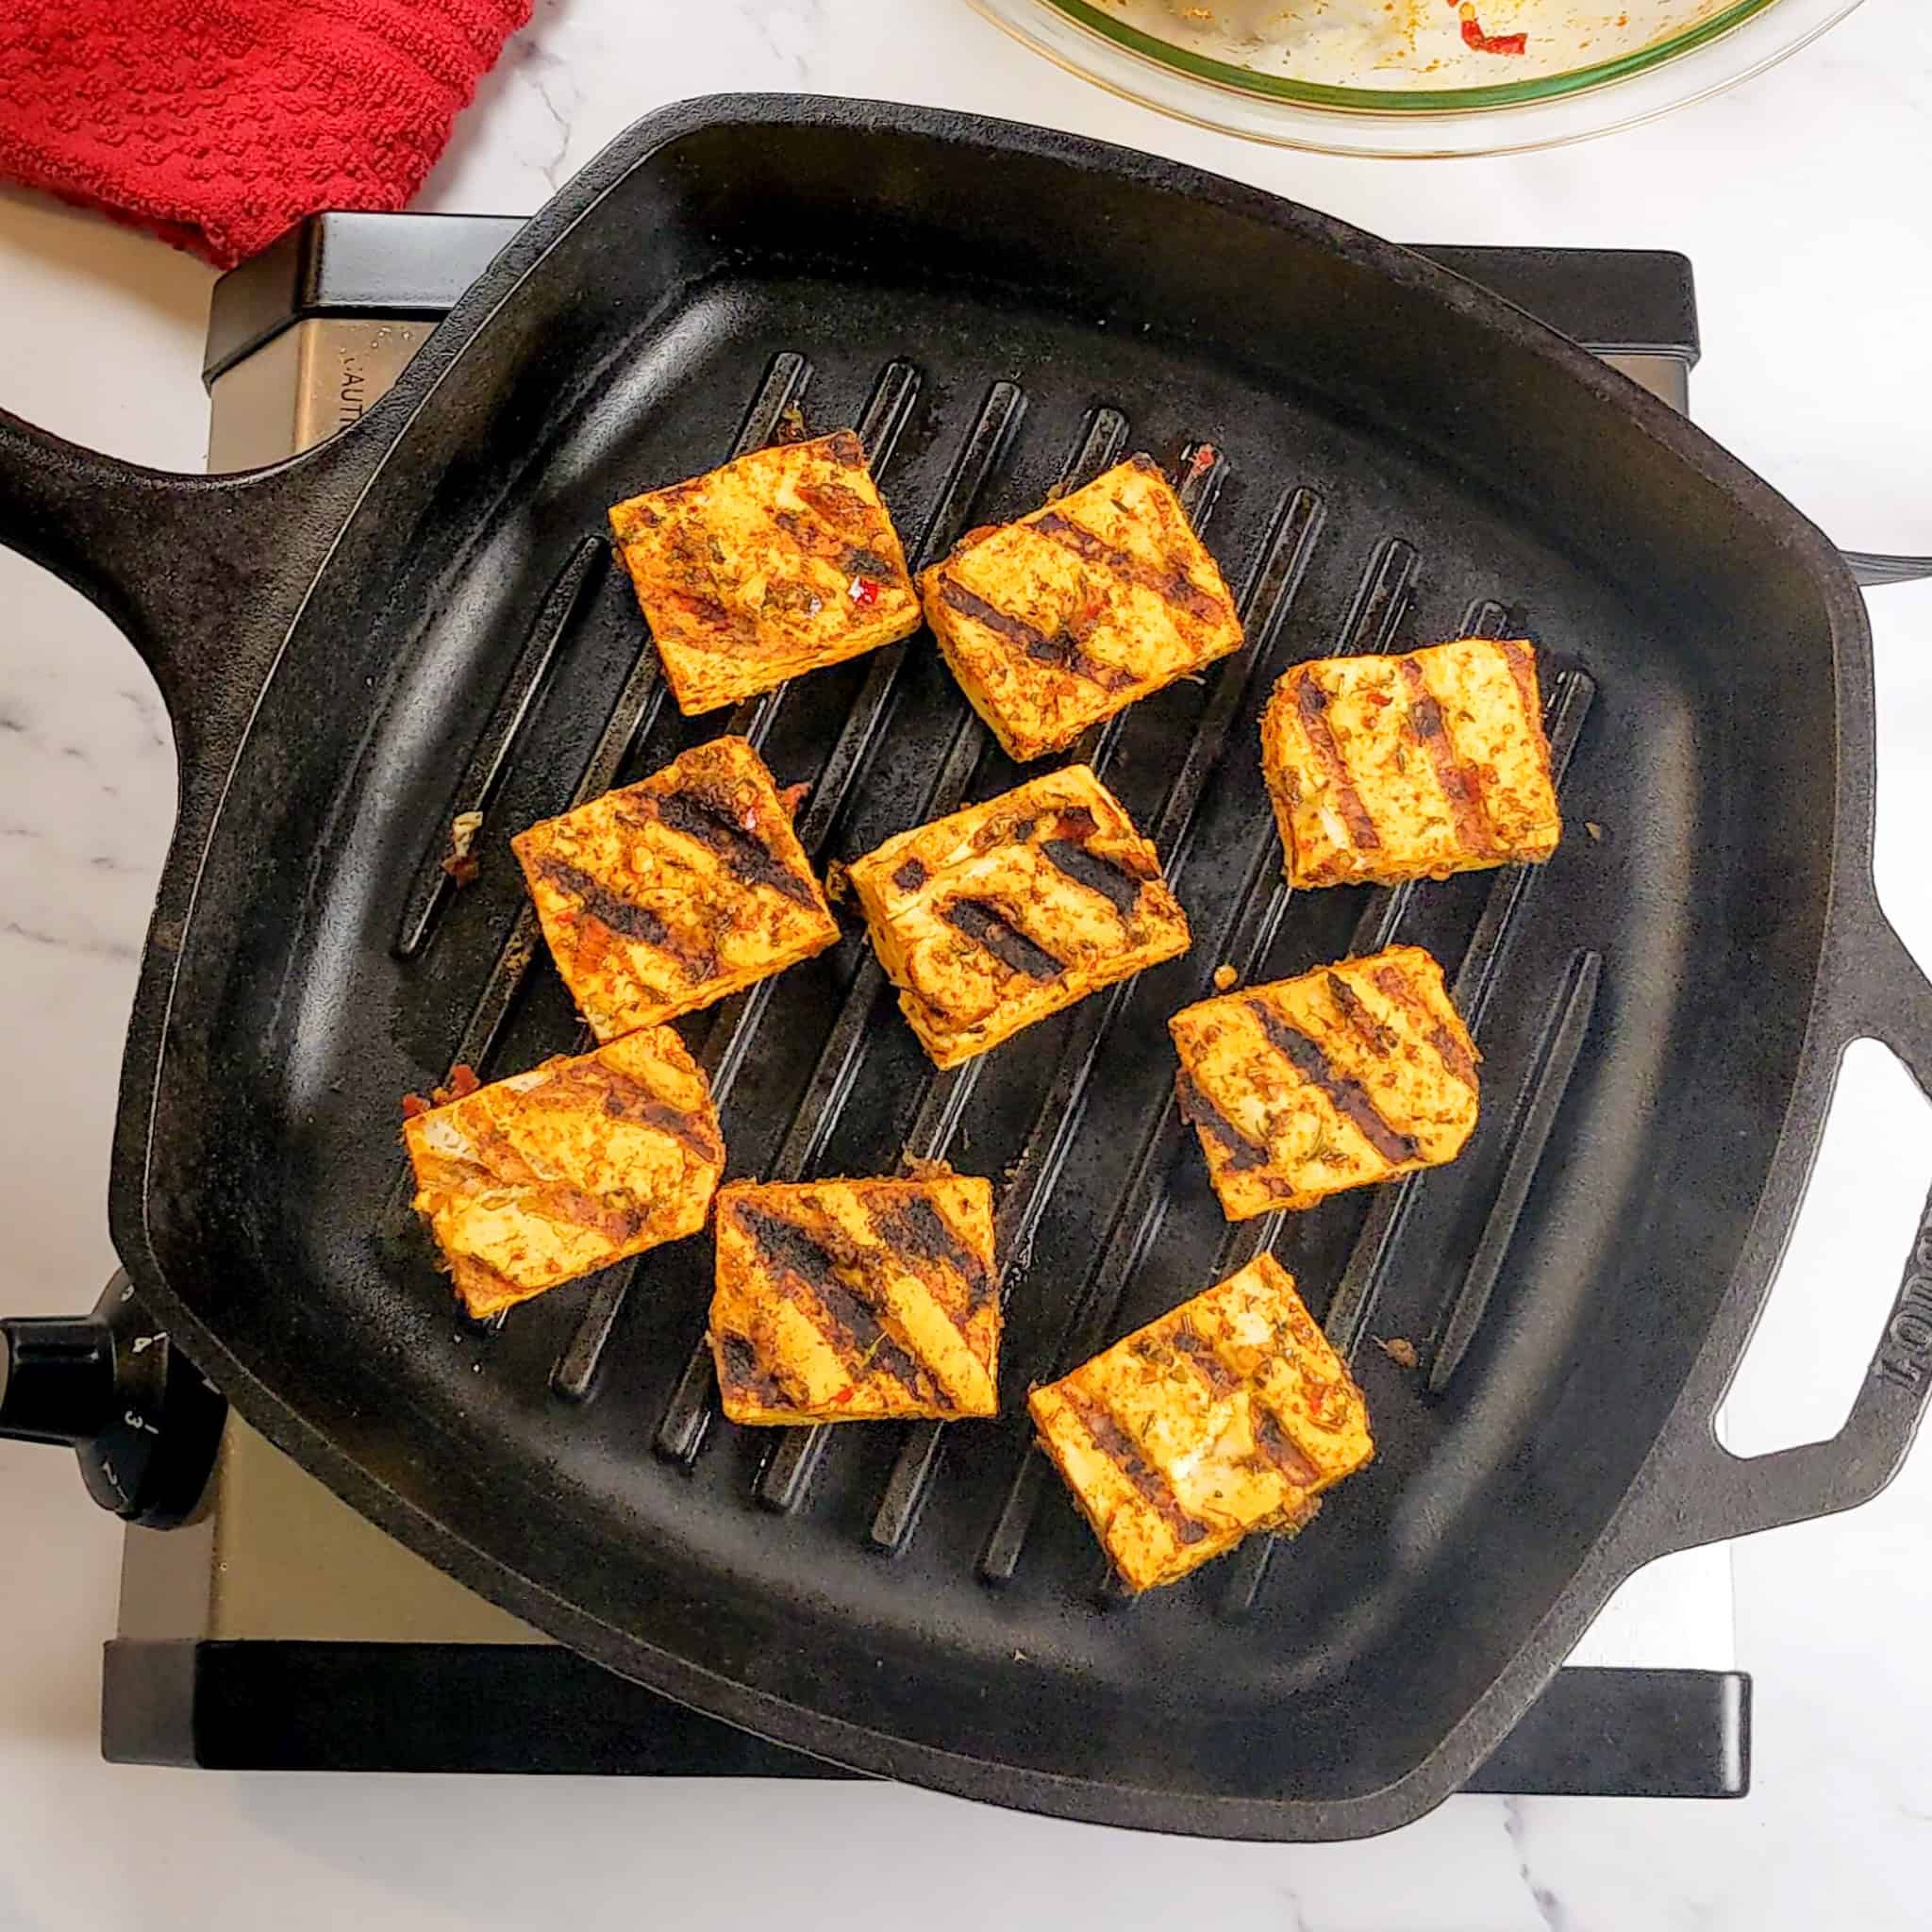 marinated tofu grilling in a grill pan, flipped and showing grill marks.